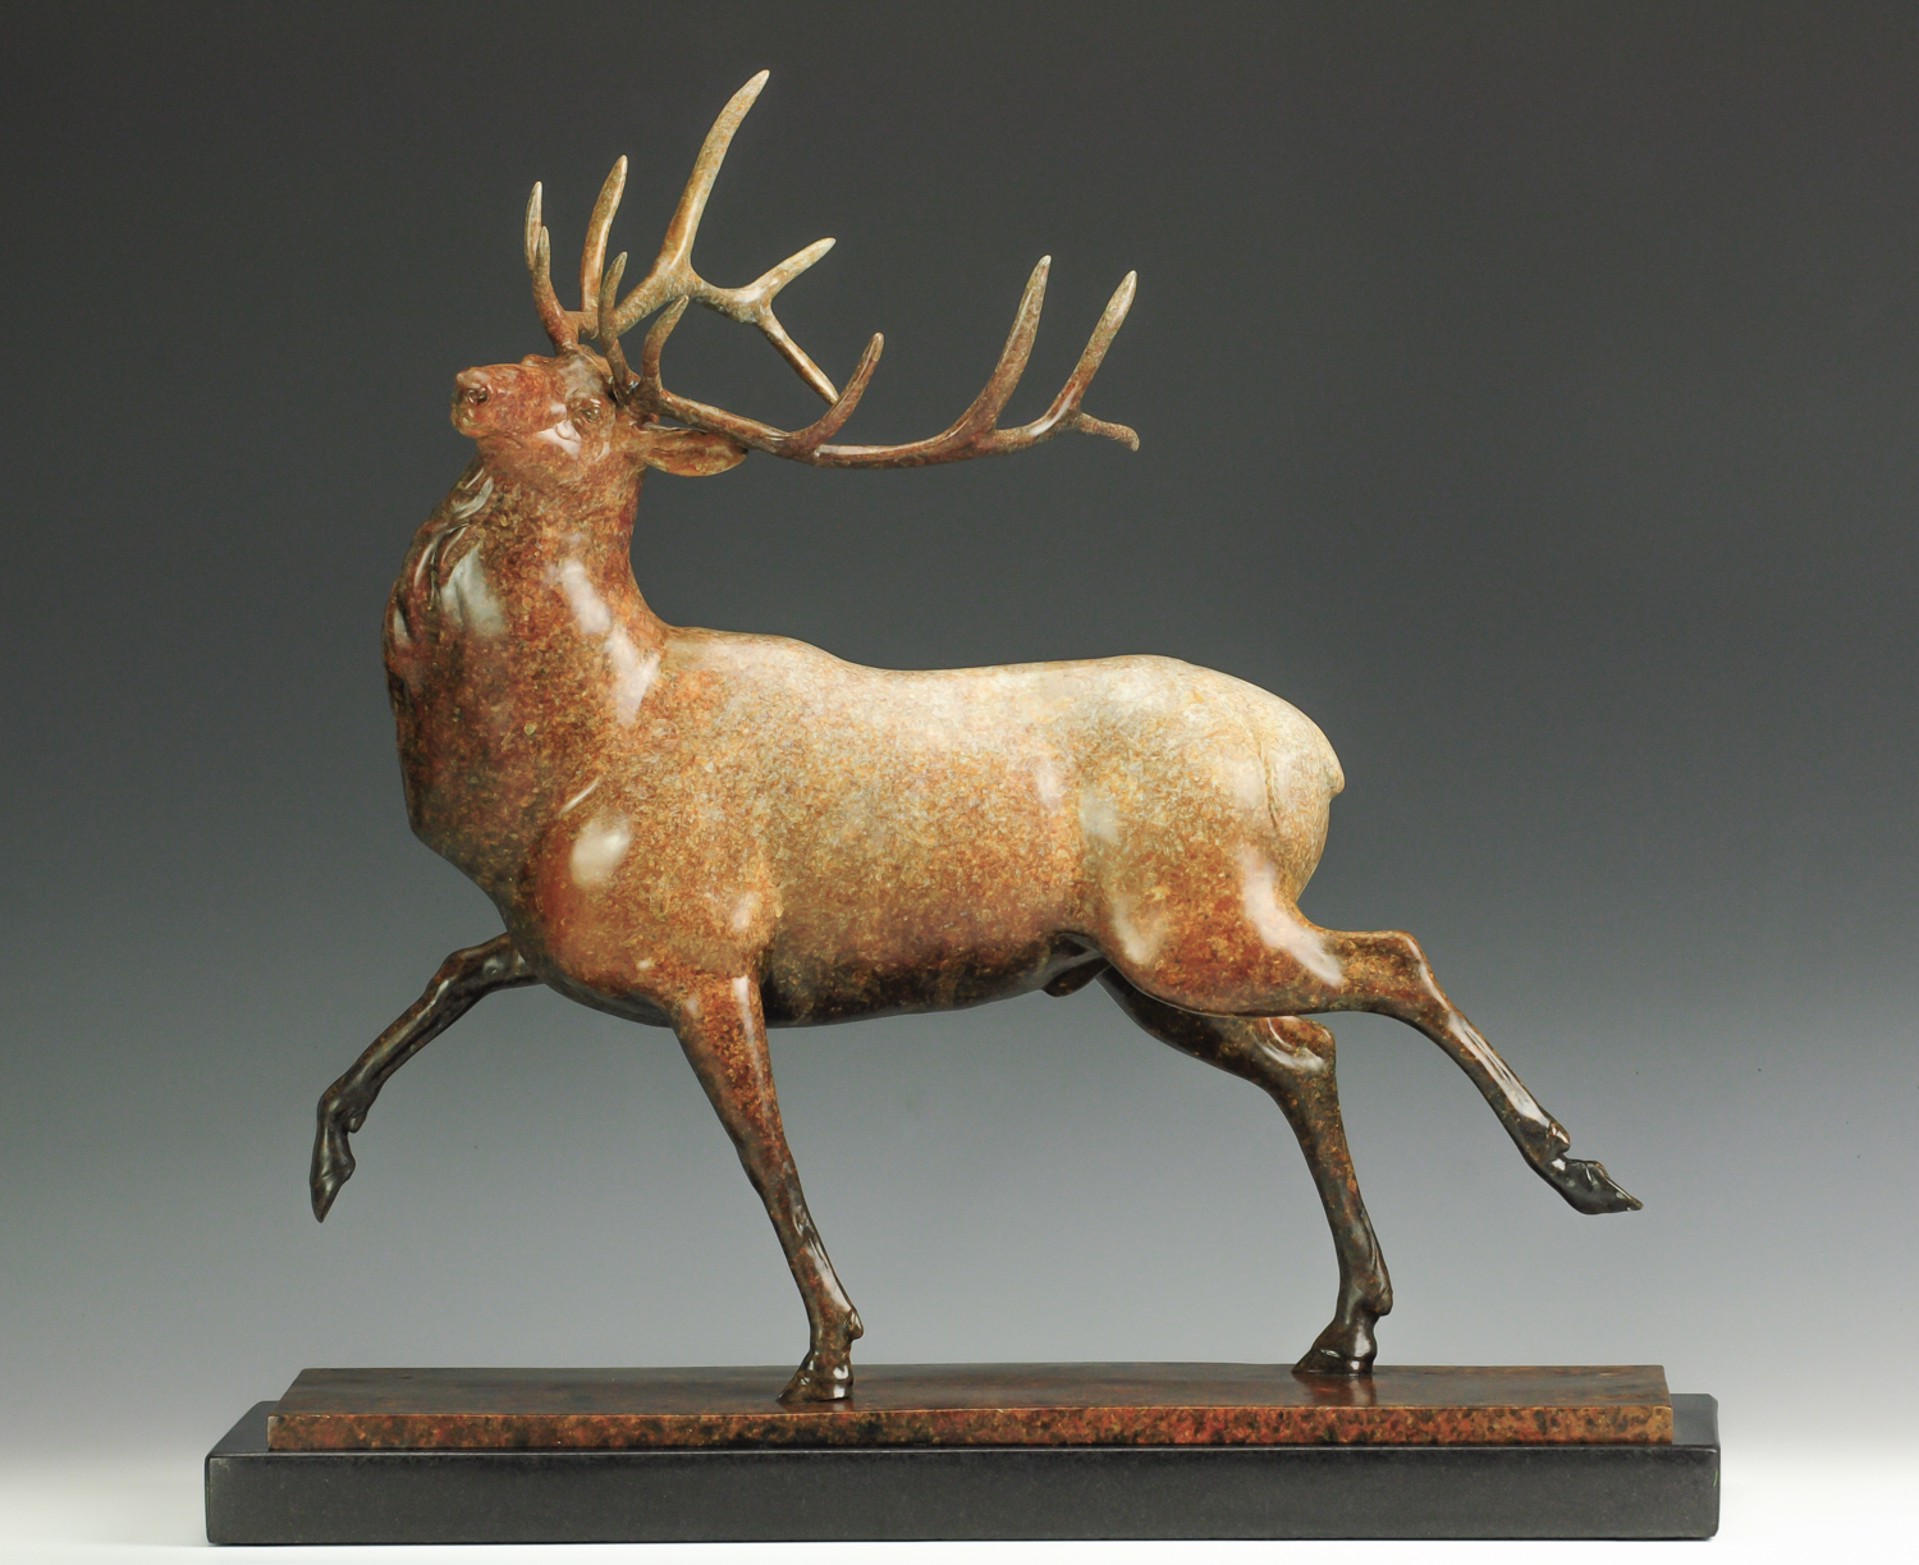 A Fine Art Sculpture In Bronze By Jeremy Bradshaw Featuring An Elk, Available At Gallery Wild